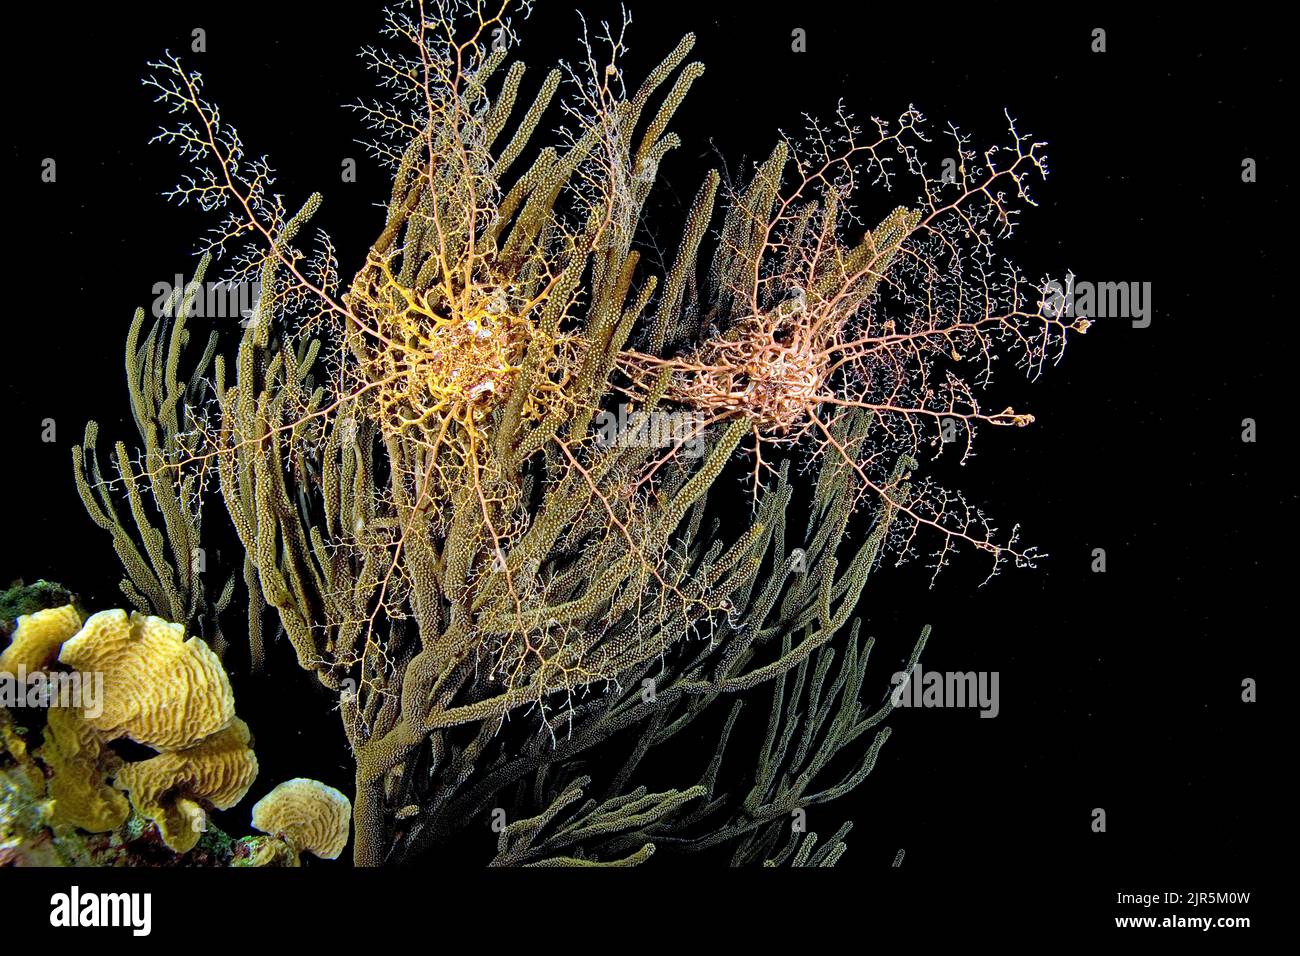 Basket Star, Caribbean Basket Star (Astrophyton muricatum, Euryale muricatum), the pancton eater is commonly found at nigth, with, Cuba, Caribbean Stock Photo